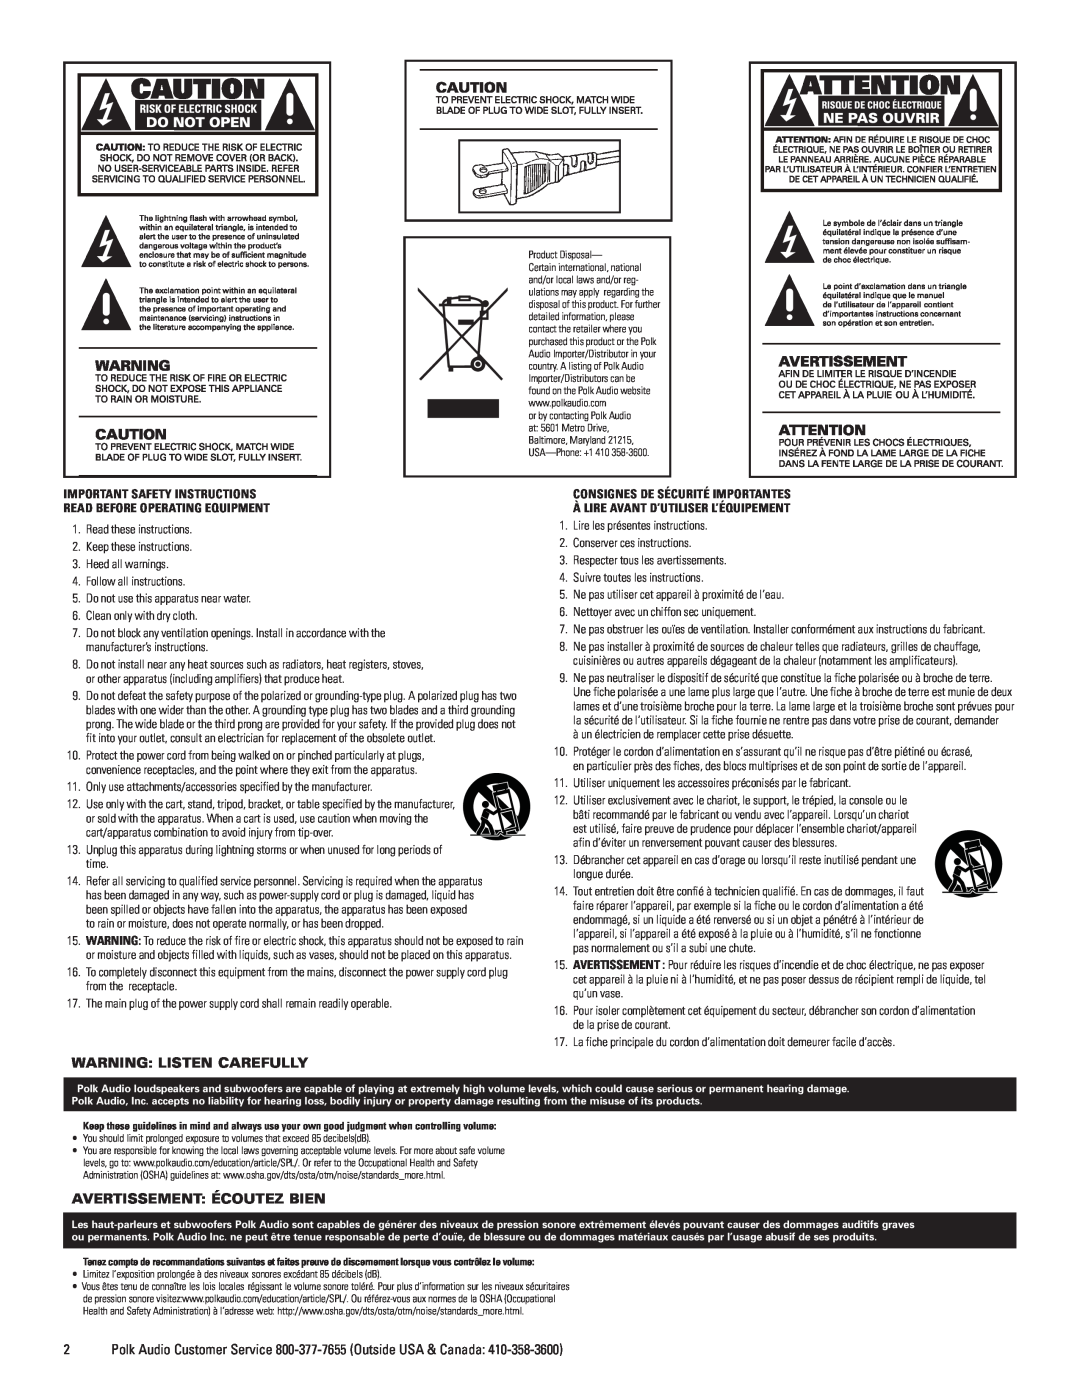 Polk Audio DSWmicroPRO1000 owner manual Warning Listen Carefully, Avertissement Écoutez Bien, Important Safety Instructions 